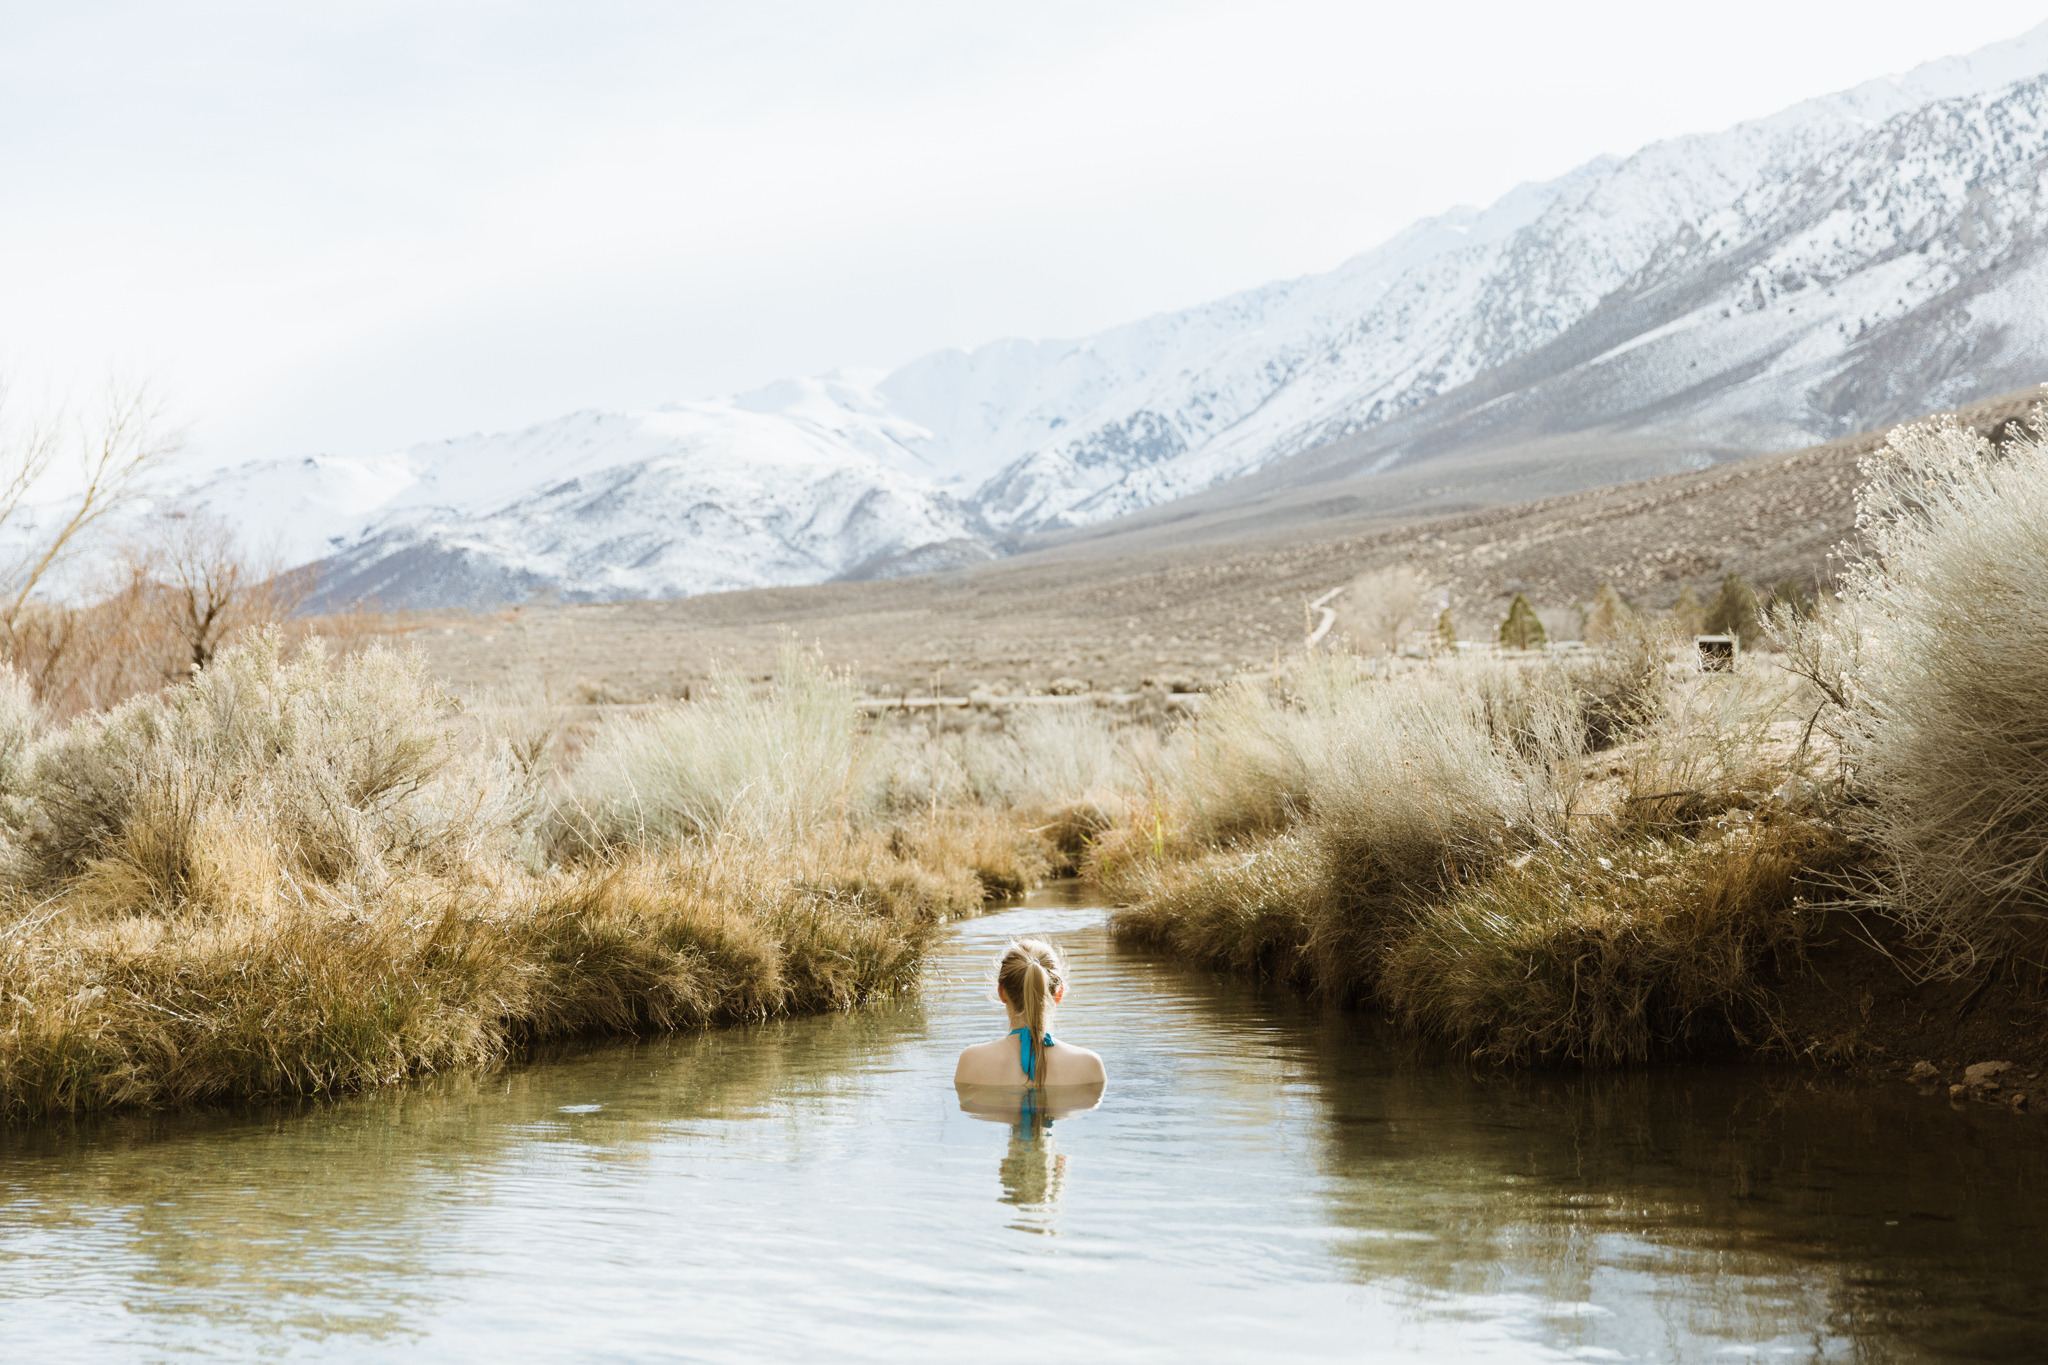 hot springs in the mountains | utah and california adventure elopement photographers | the hearnes adventure photography | www.thehearnes.com